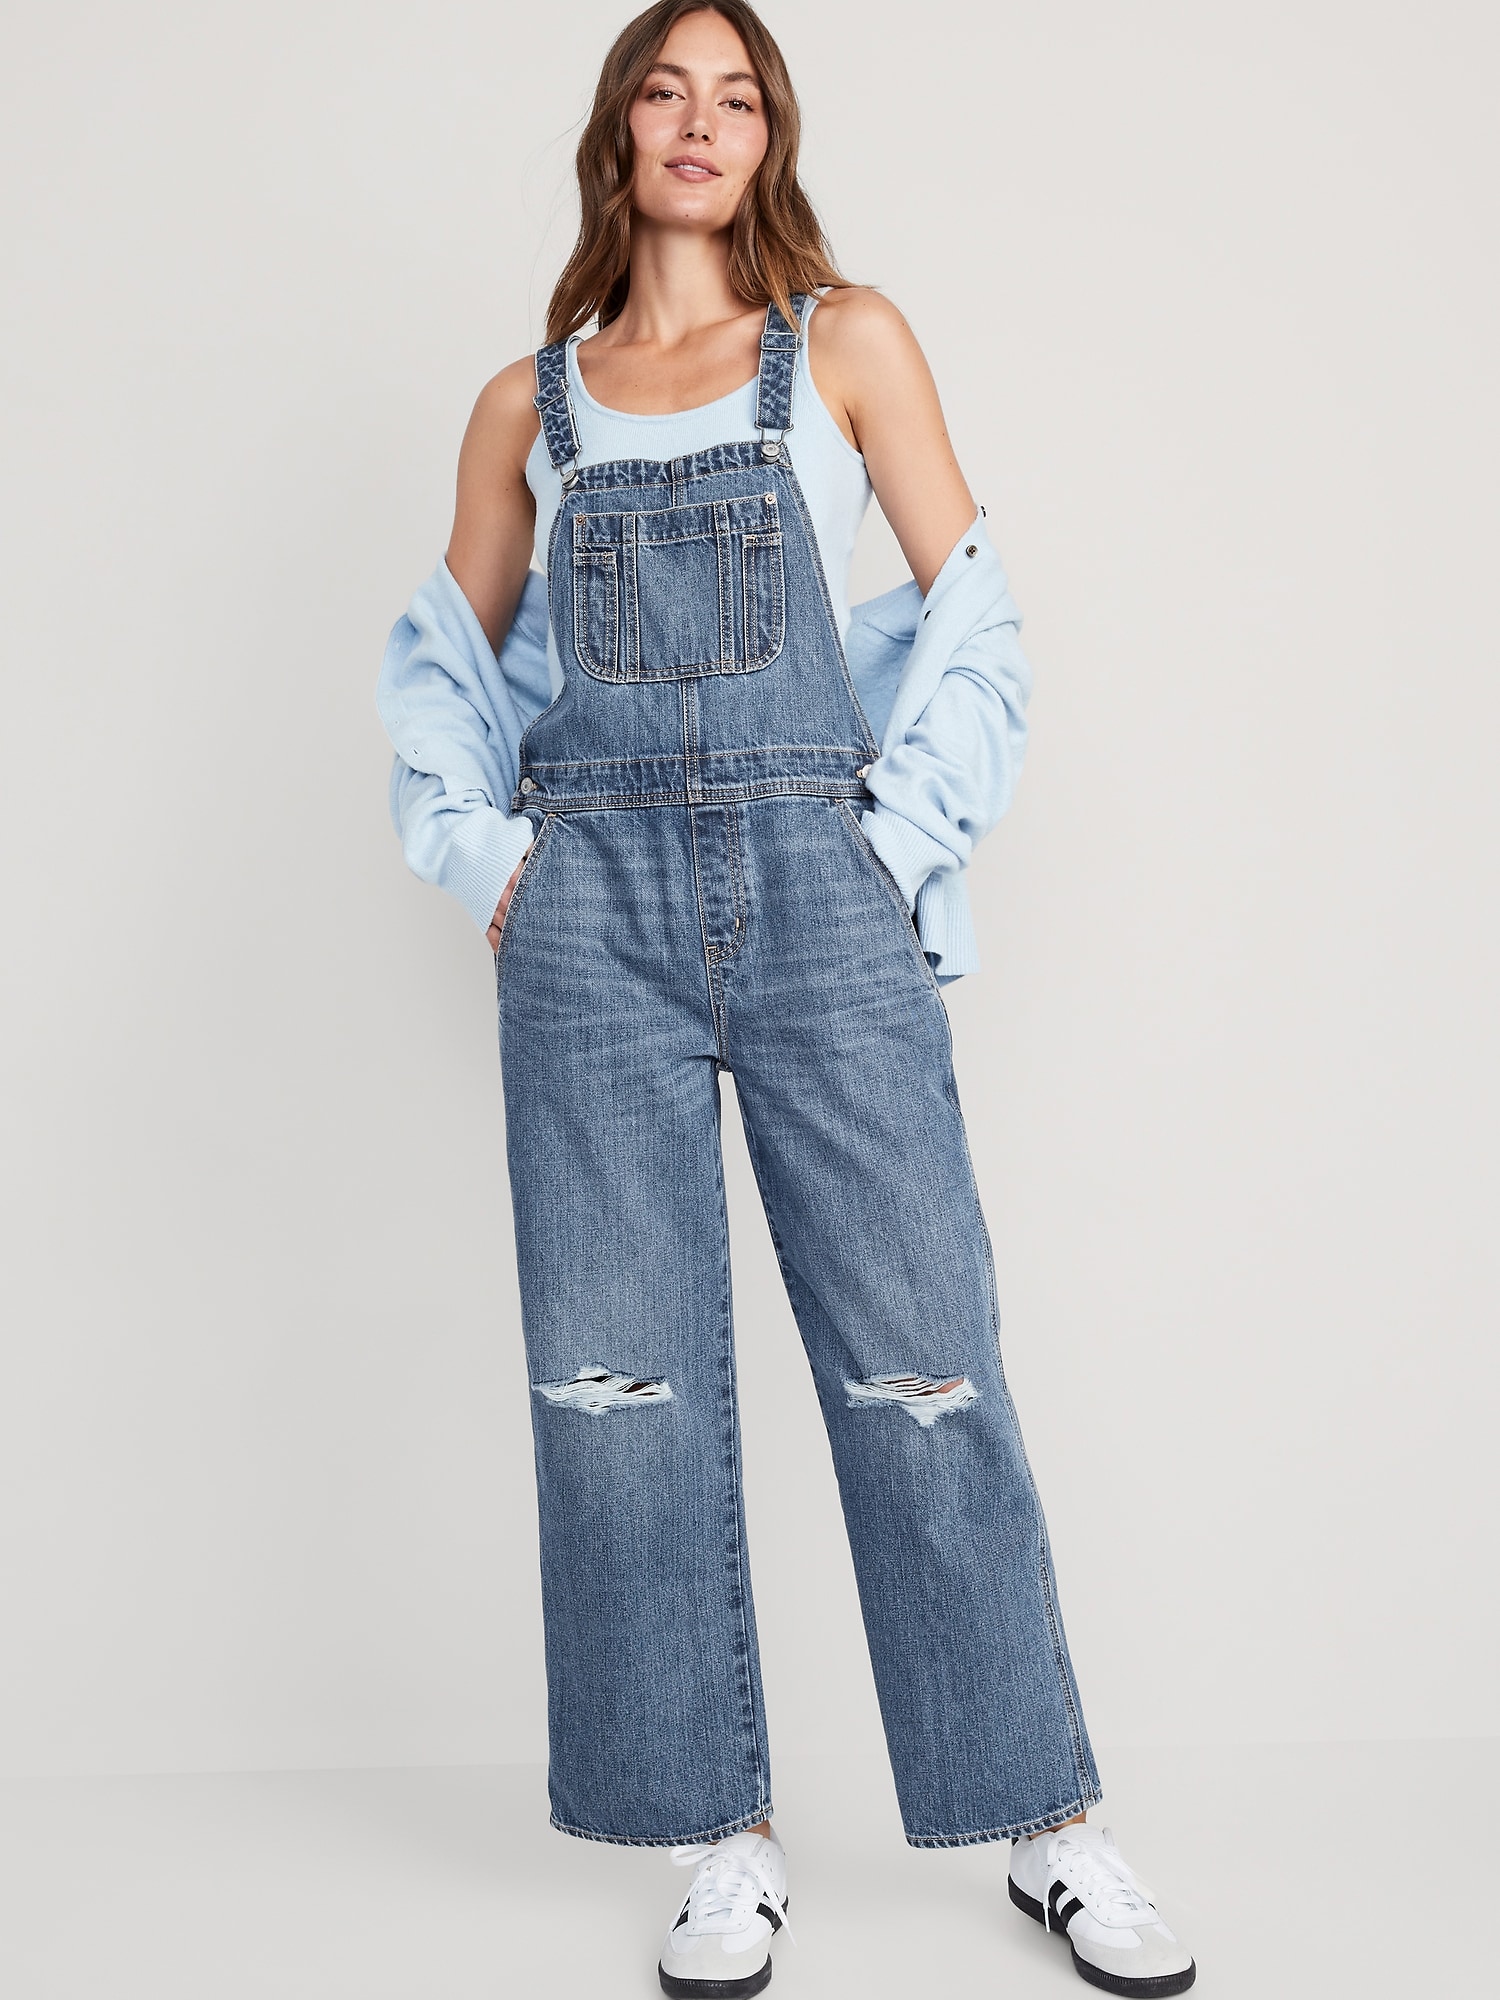 Distressed Jean Overalls for Women, Old Navy